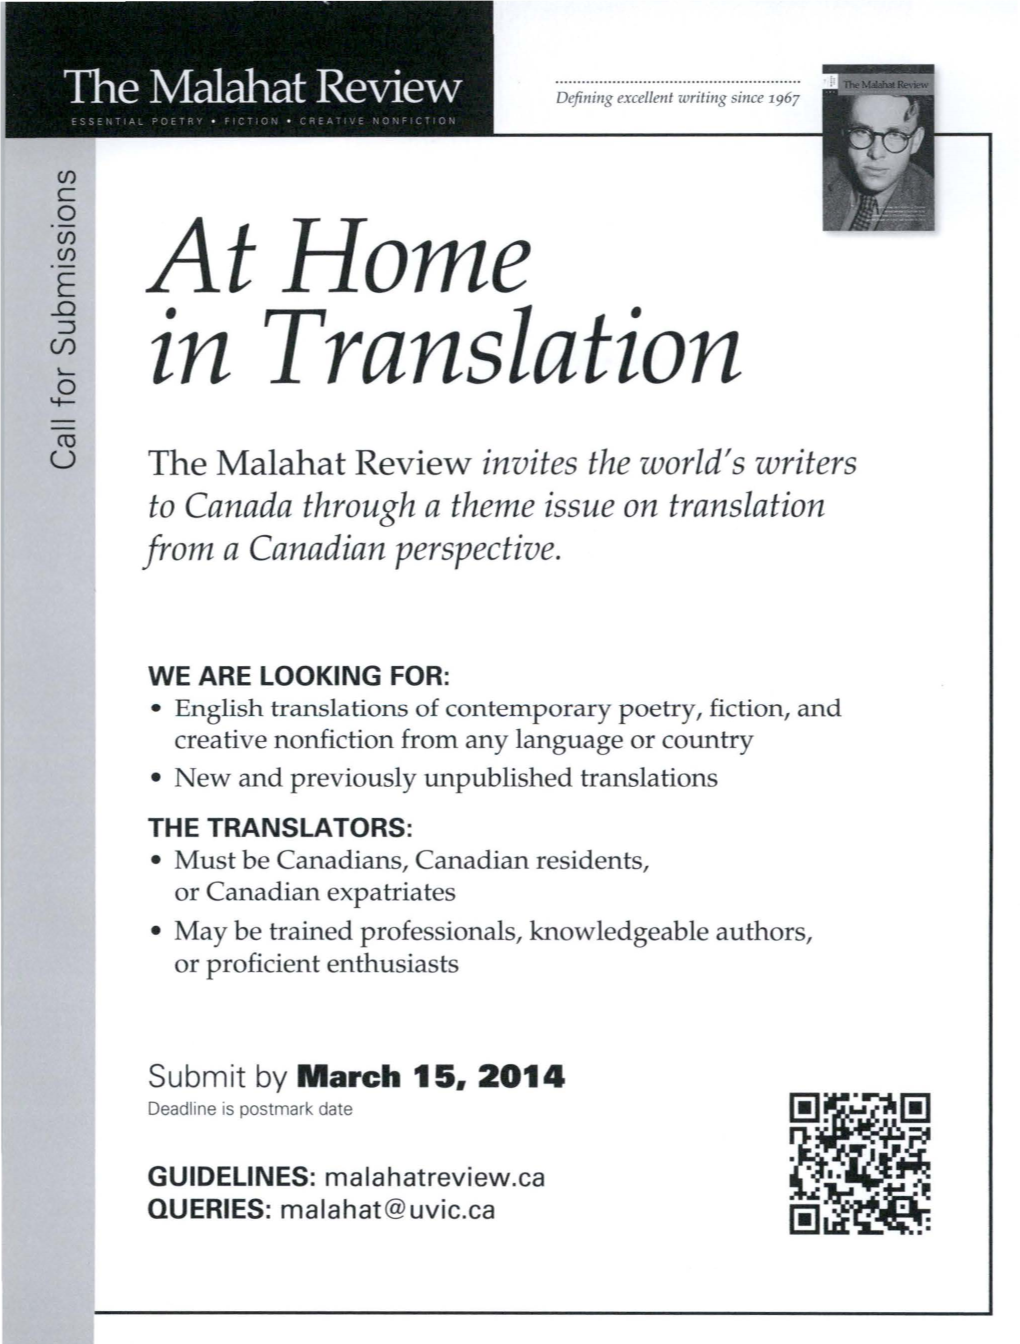 At Home in Translation